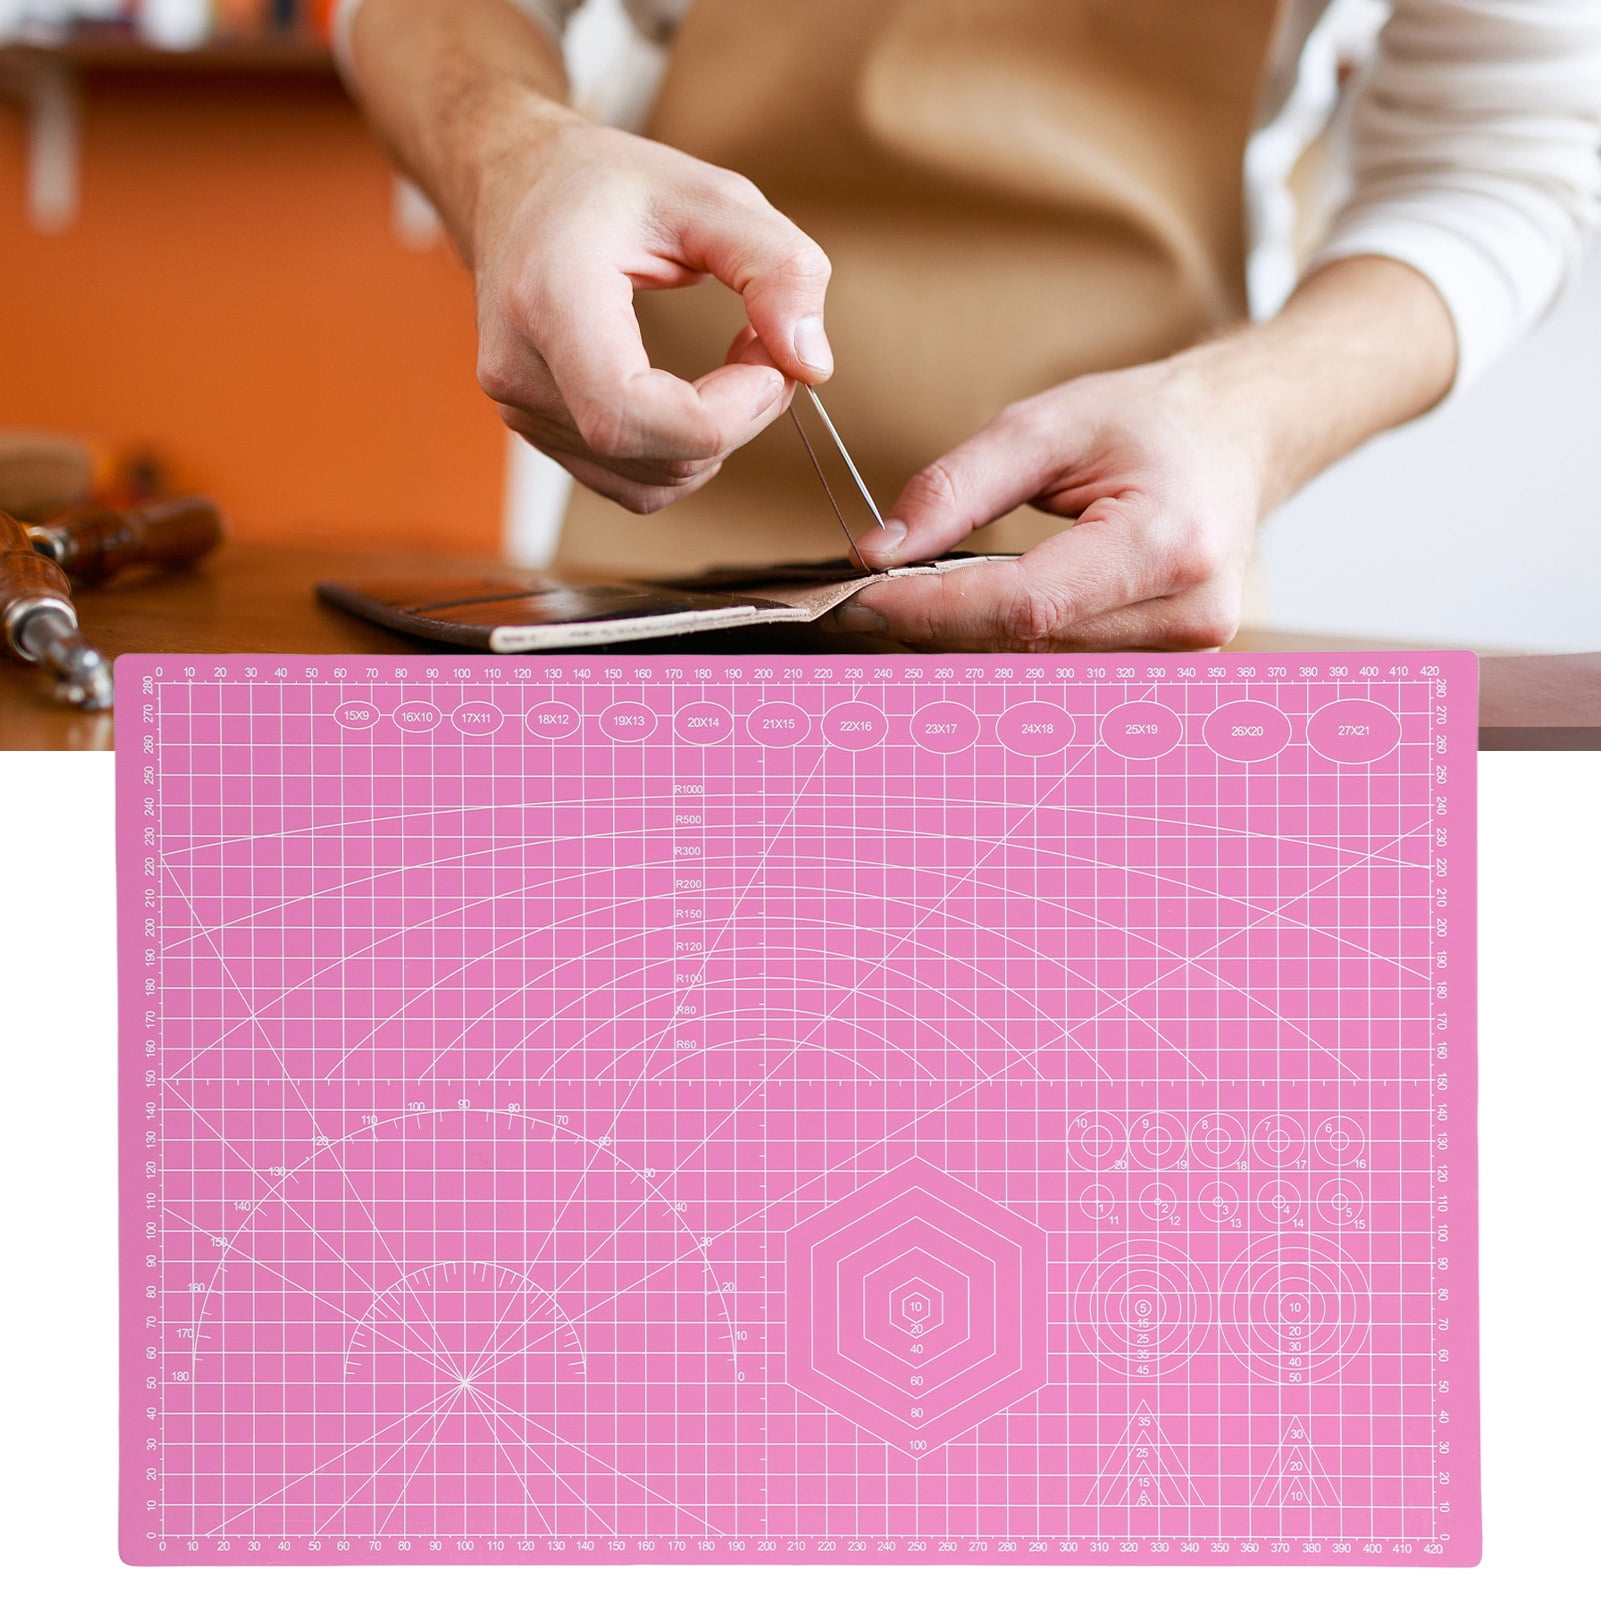 Uxcell 3.1 x 3.1 Cutting Mats Rotary Fabric Mat Self Recover Double Sided  Mini, Pink 2 Pack 